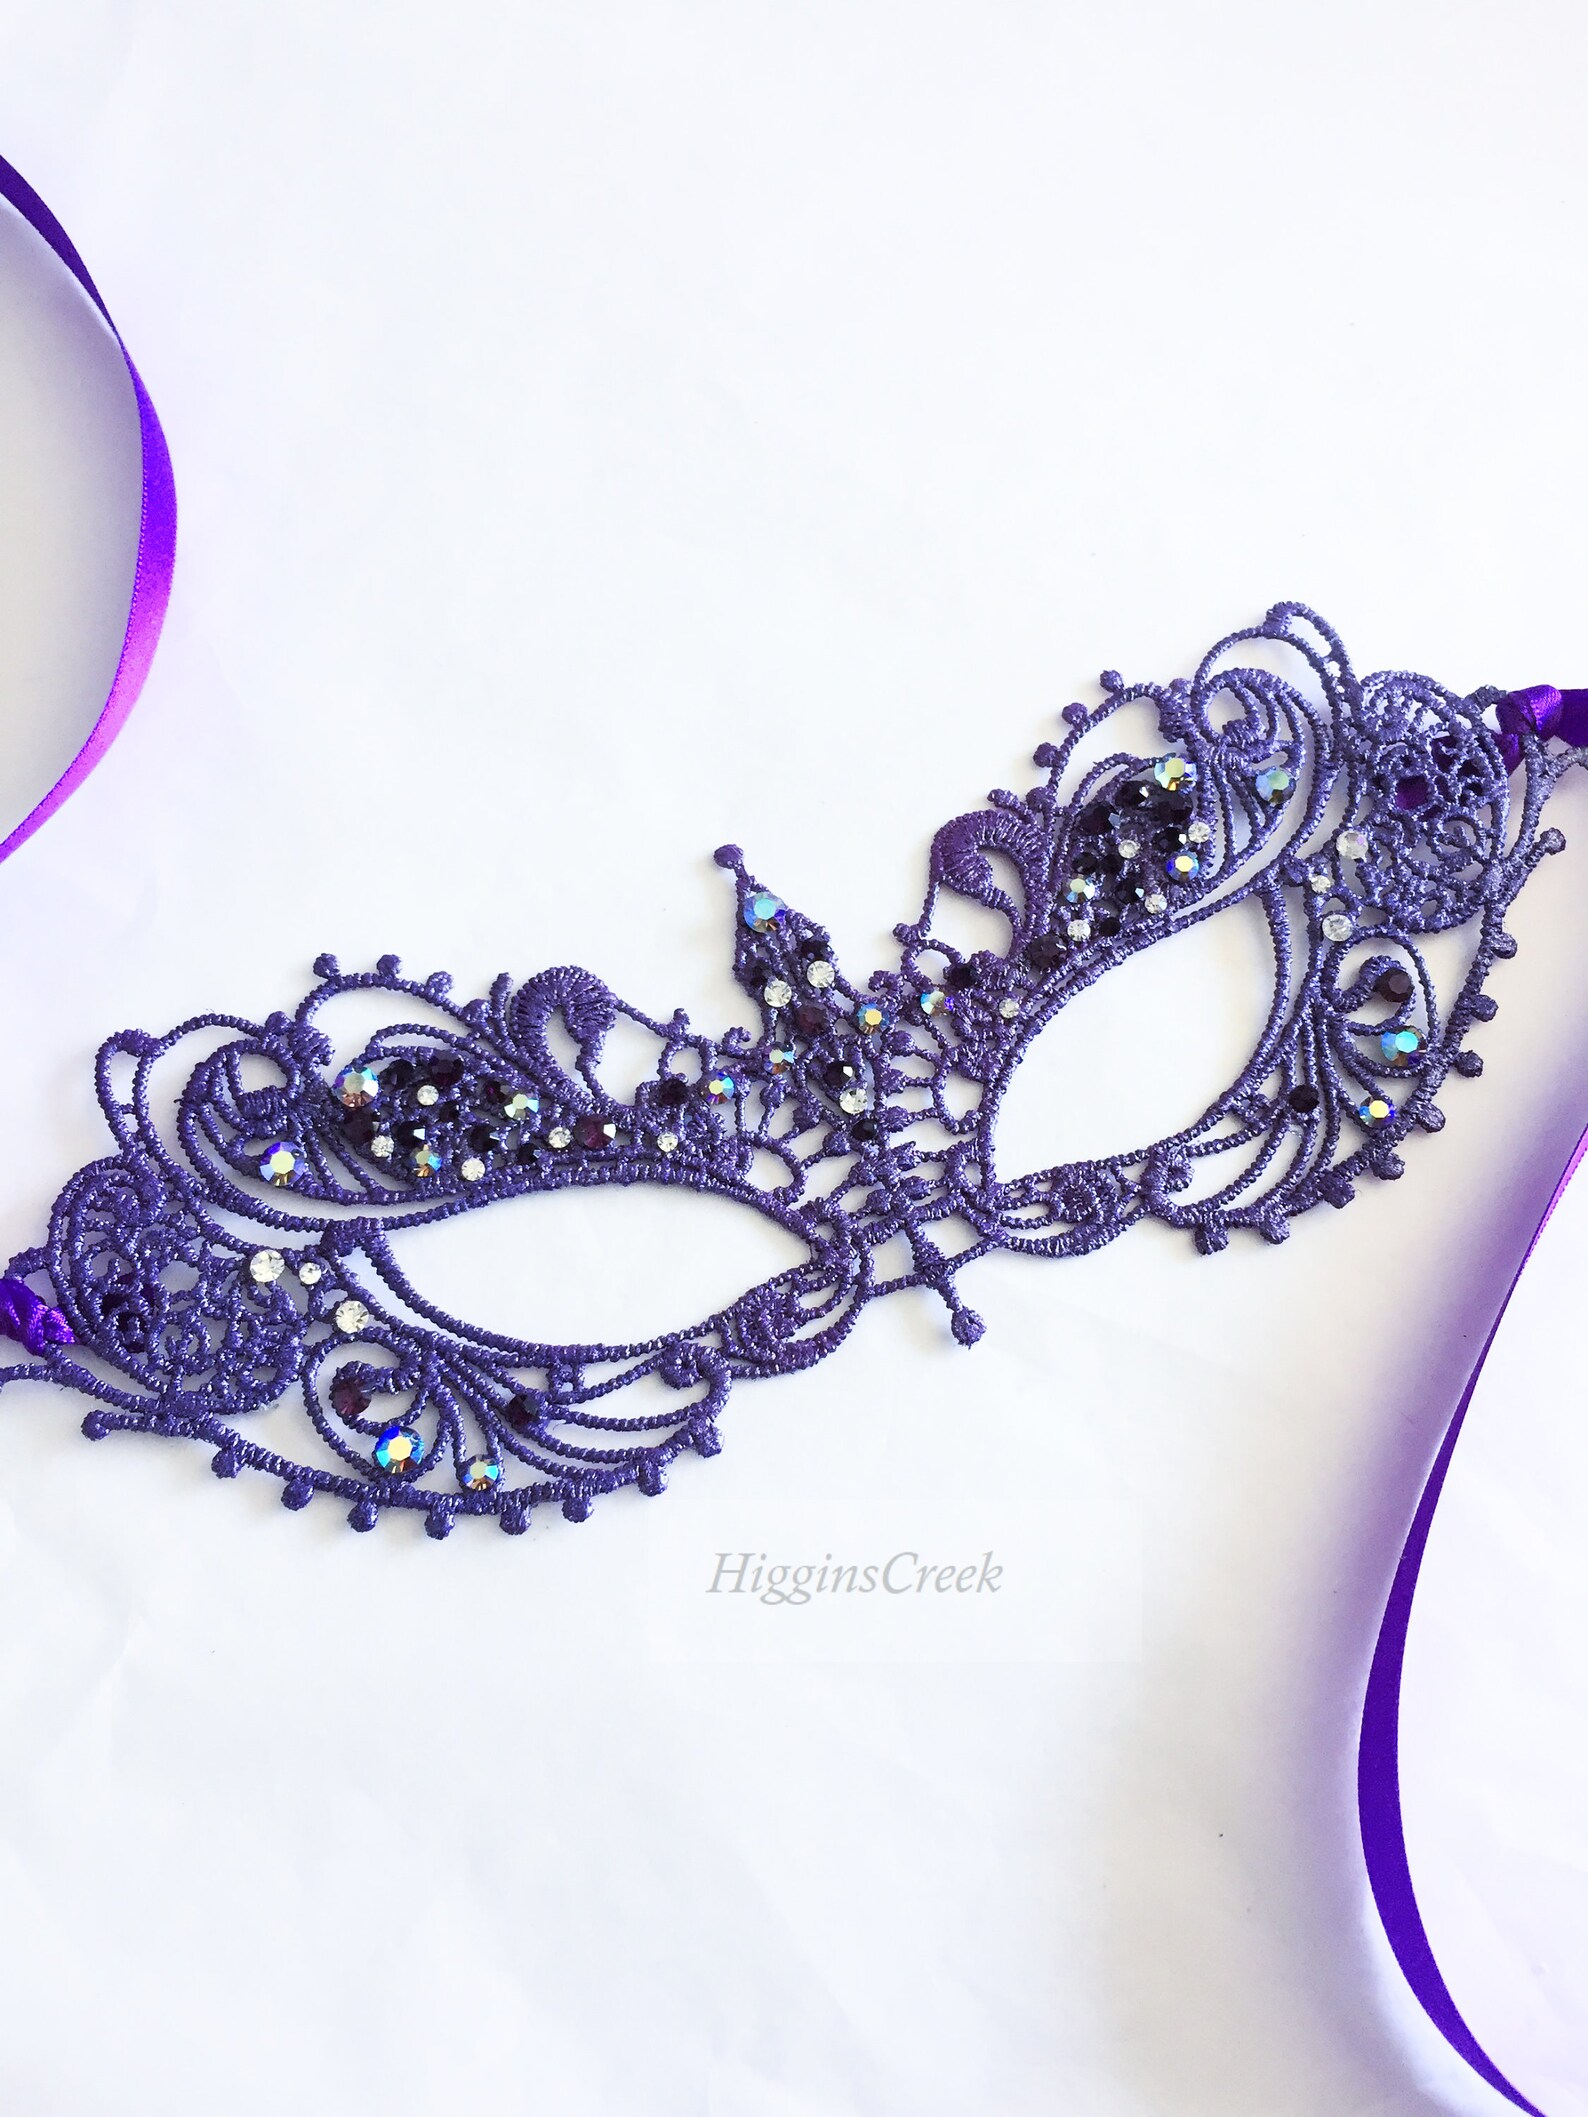 Purple Woman Masquerade Mask With Vibrant Shades of Purple - Etsy